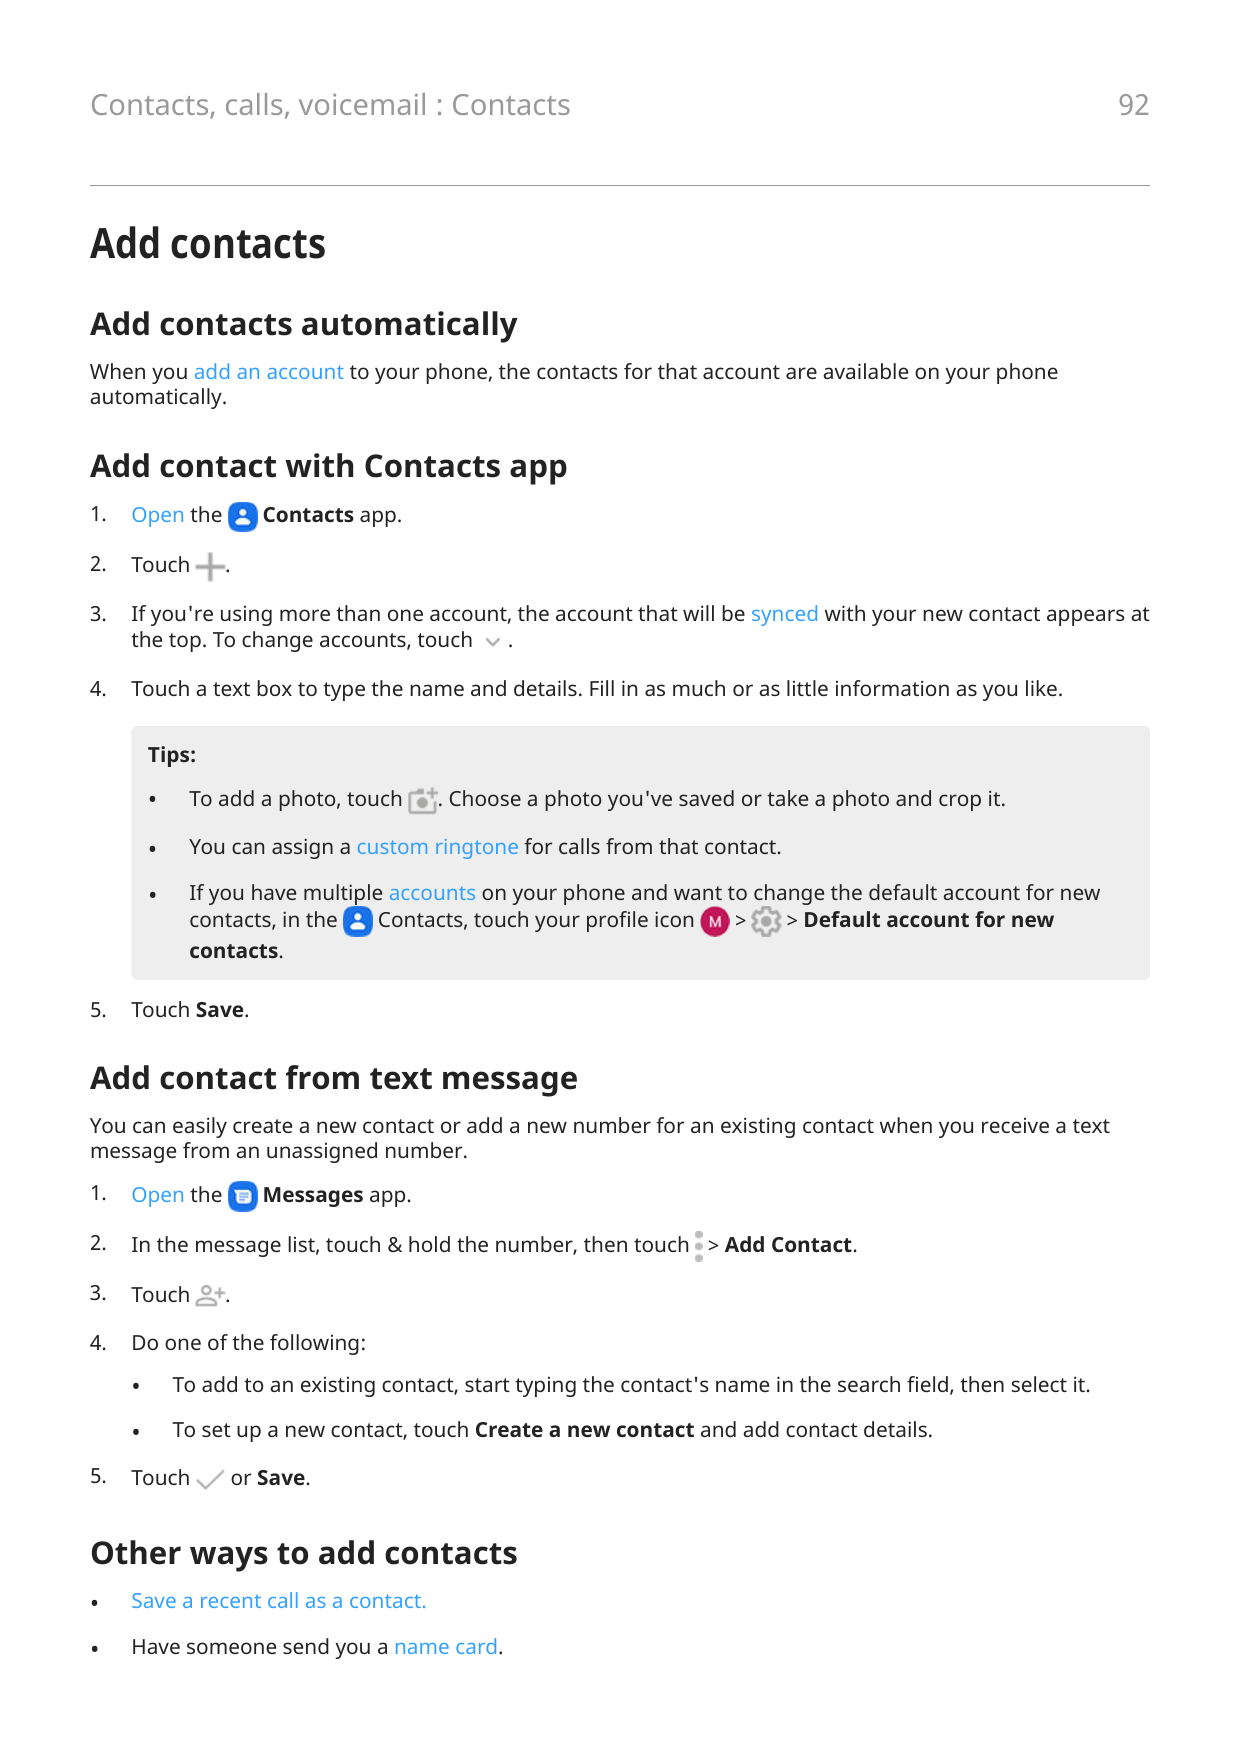 Contacts, calls, voicemail : Contacts92Add contactsAdd contacts automaticallyWhen you add an account to your phone, the contacts